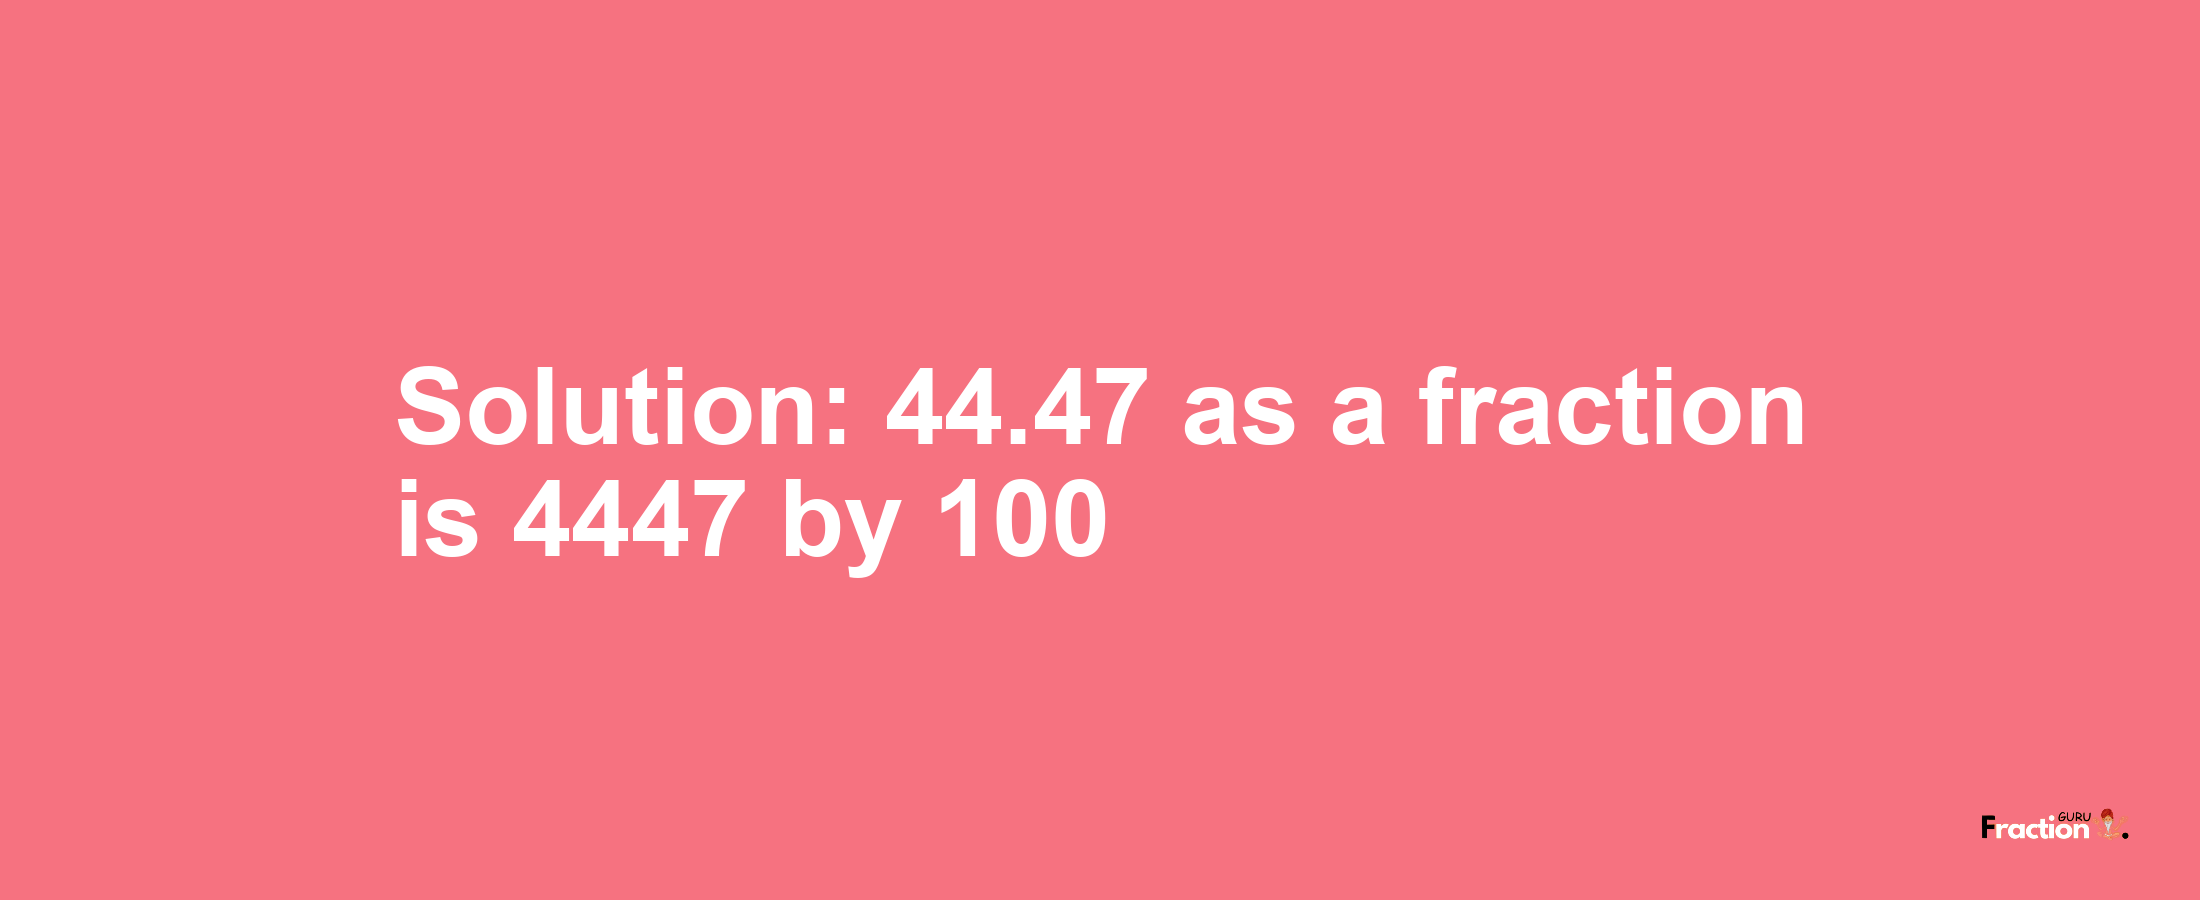 Solution:44.47 as a fraction is 4447/100